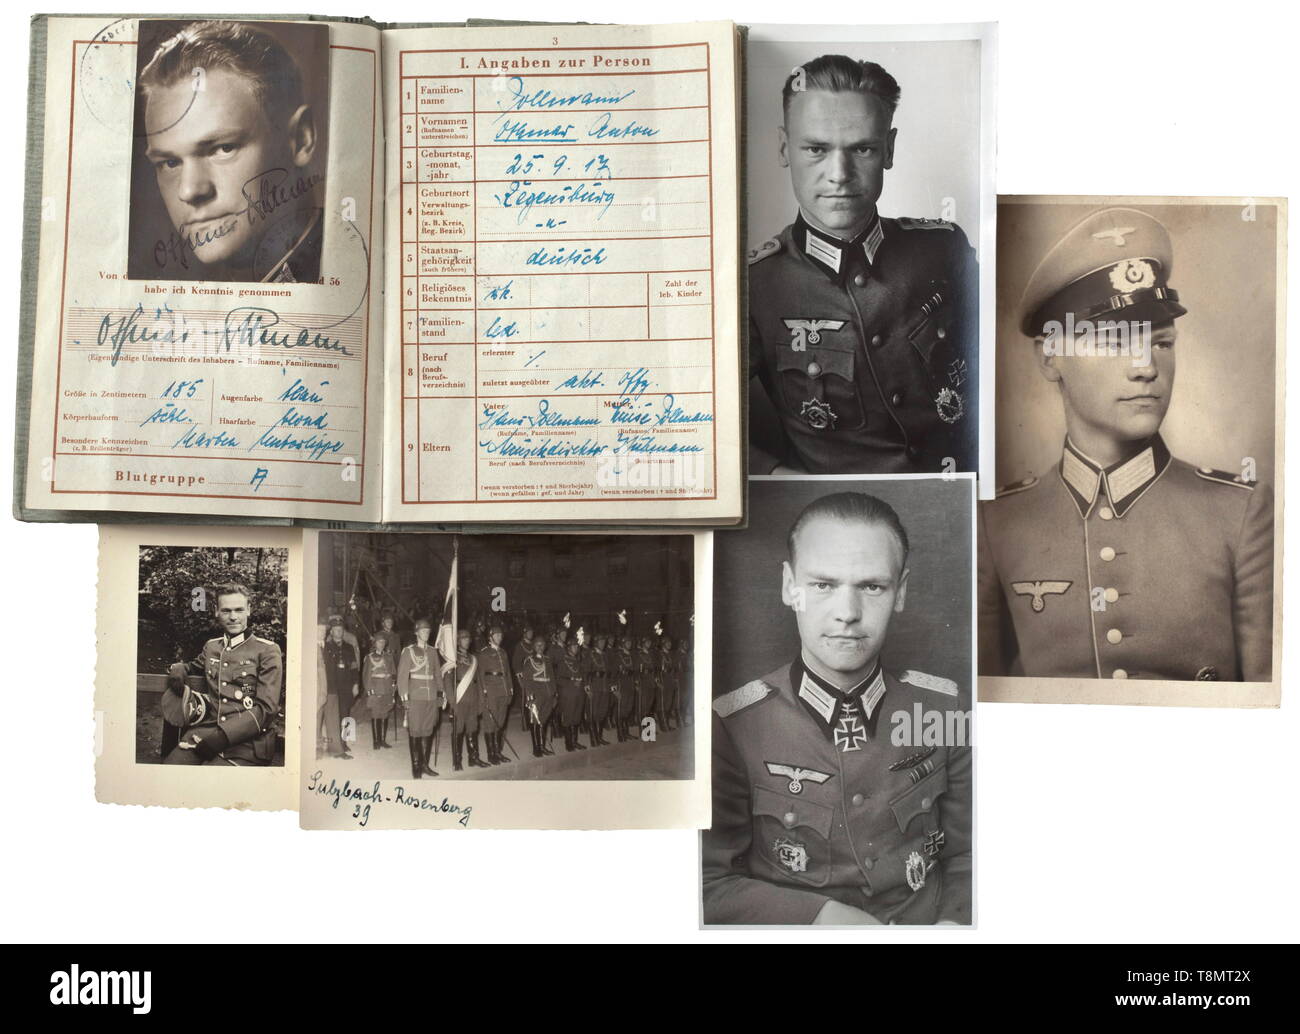 Wehrpass and photos of Oak Leaves Winner Othmar Pollmann The Wehrpass (military service book) with photo id, issued on 16 April 1945 in Bad Reichenhall through the Chief of Staff and Army High Command (OKH) respectively. With numerous entries: service postings (IR 20, 95.ID among others), training and courses of instruction, combats, stays in hospital, promotions and decorations. Among other awards, he received the Oak Leaves to the Knight's Cross, the German Cross in Gold, and the Close Combat Clasp in Silver and Bronze (see page 24). The Wehrpass is in good condition, the, Editorial-Use-Only Stock Photo